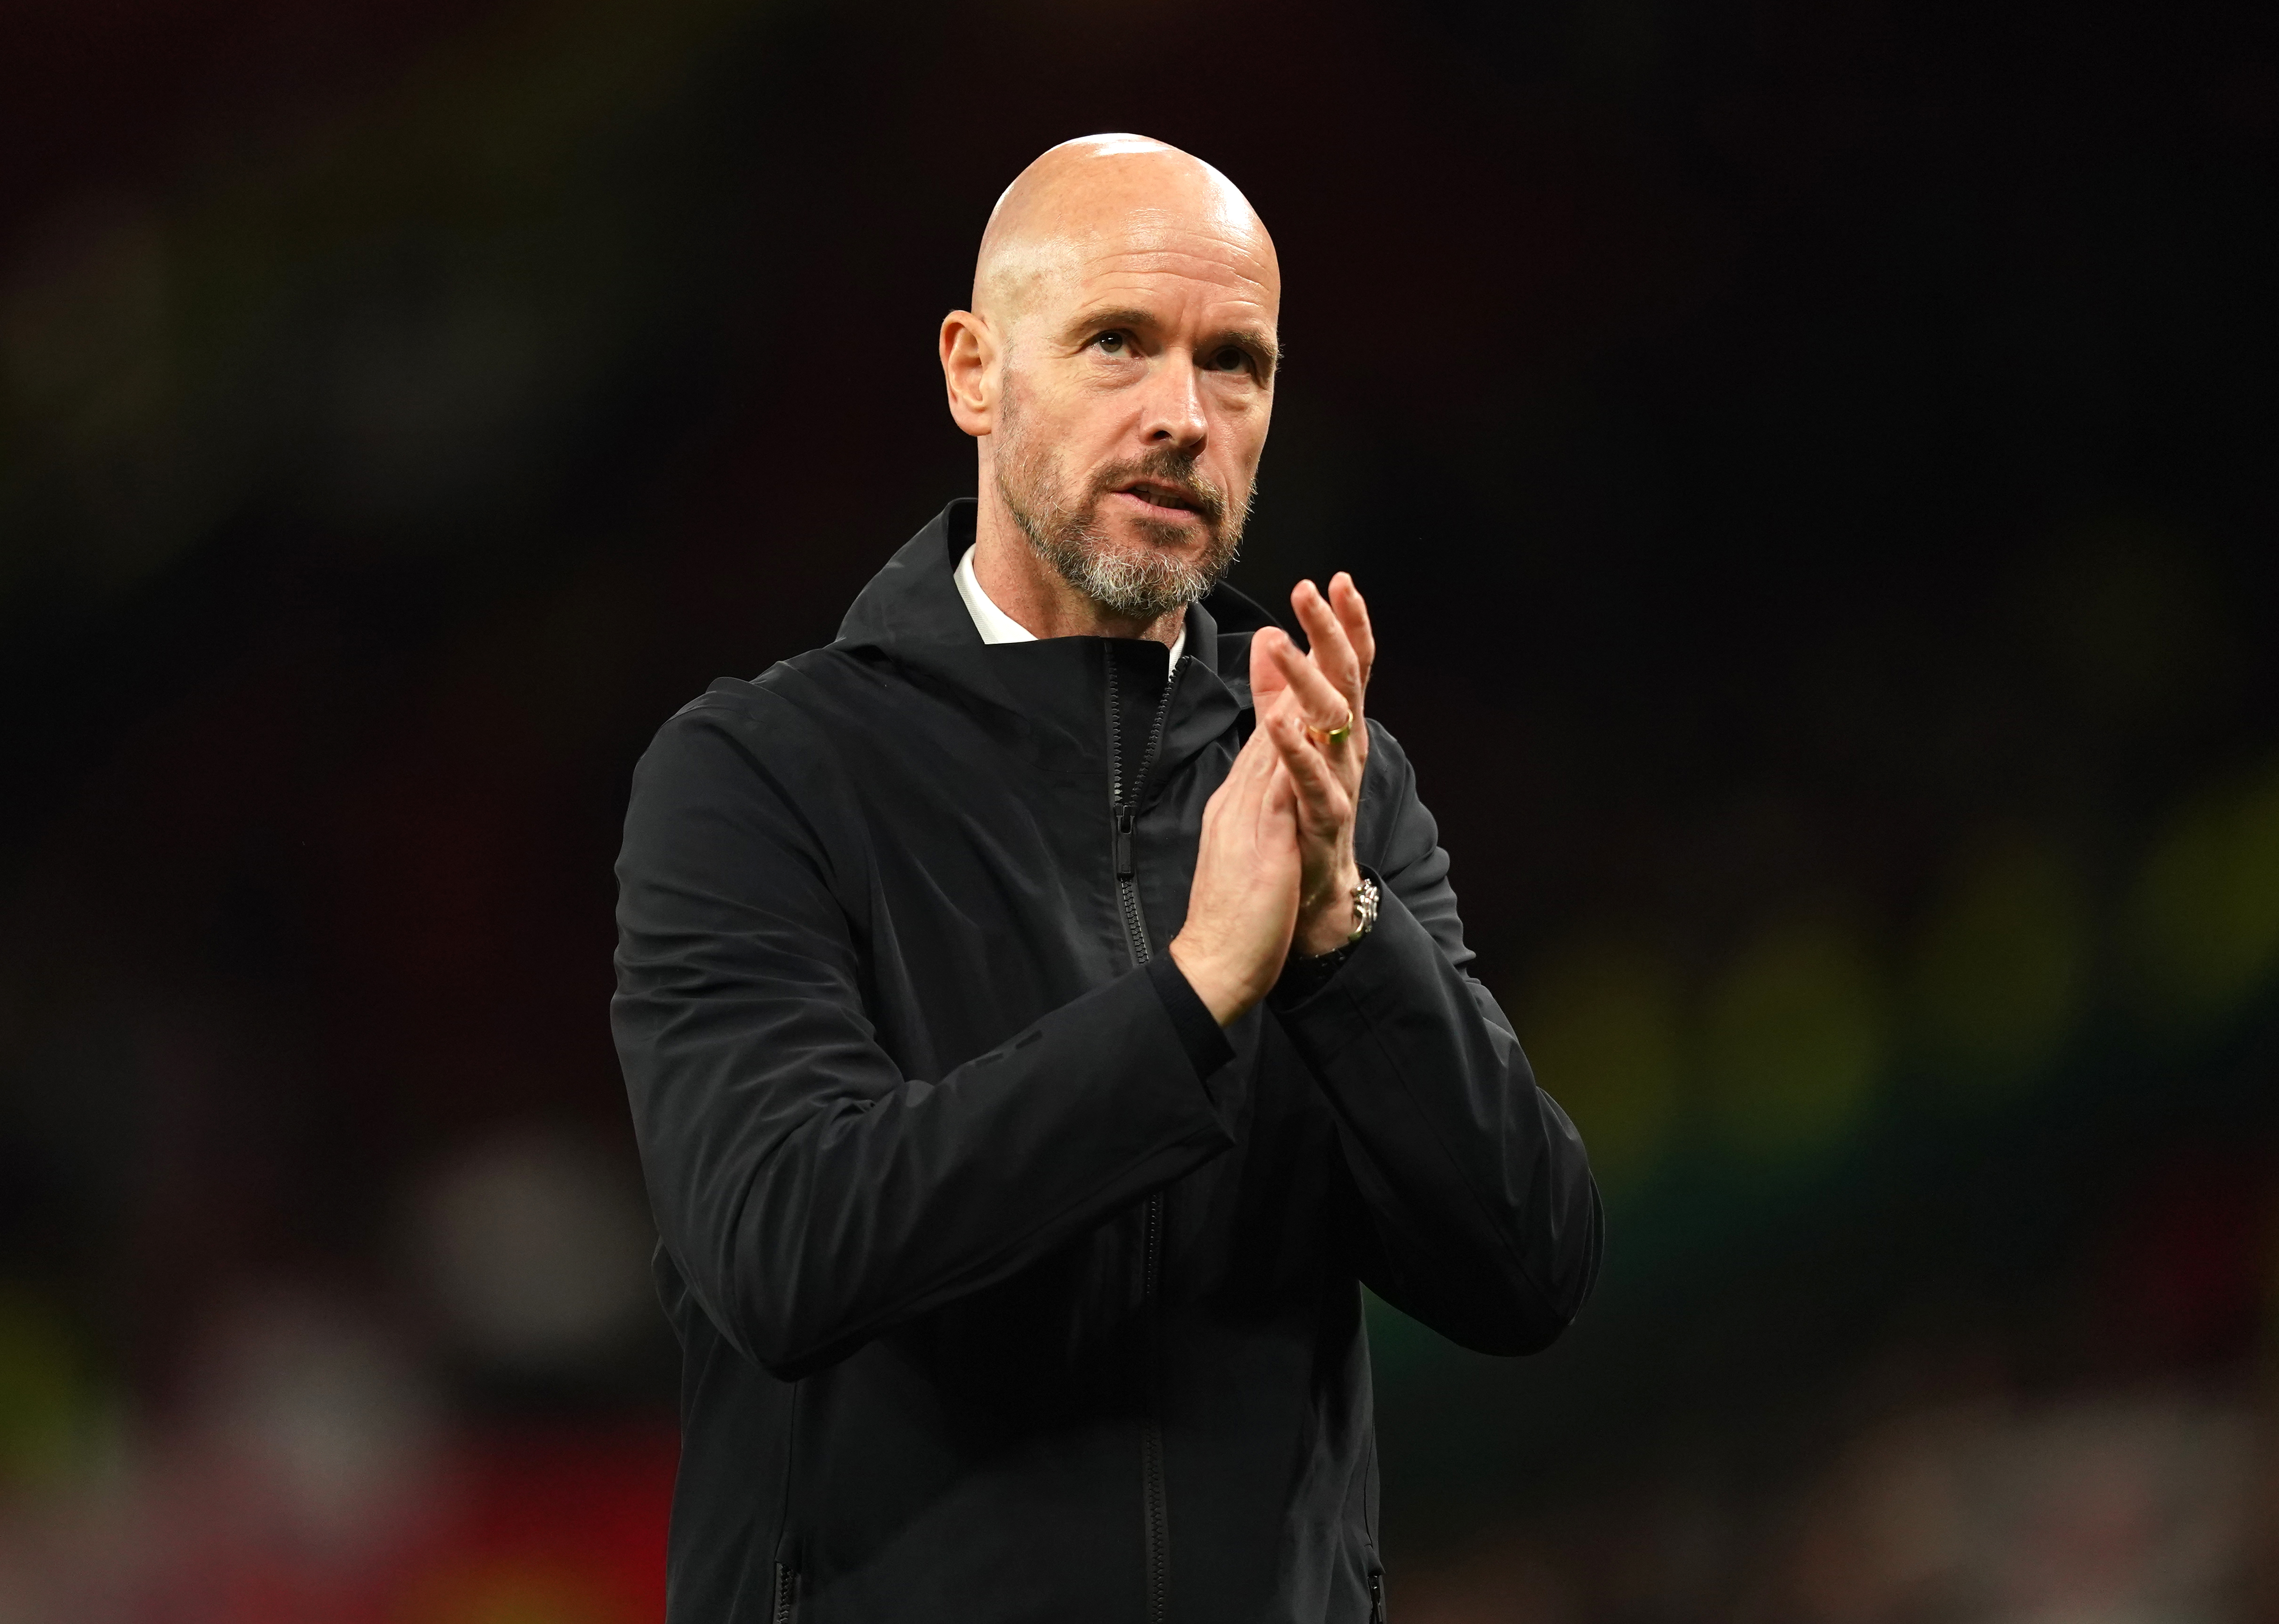 Manchester United manager Erik ten Hag says he has